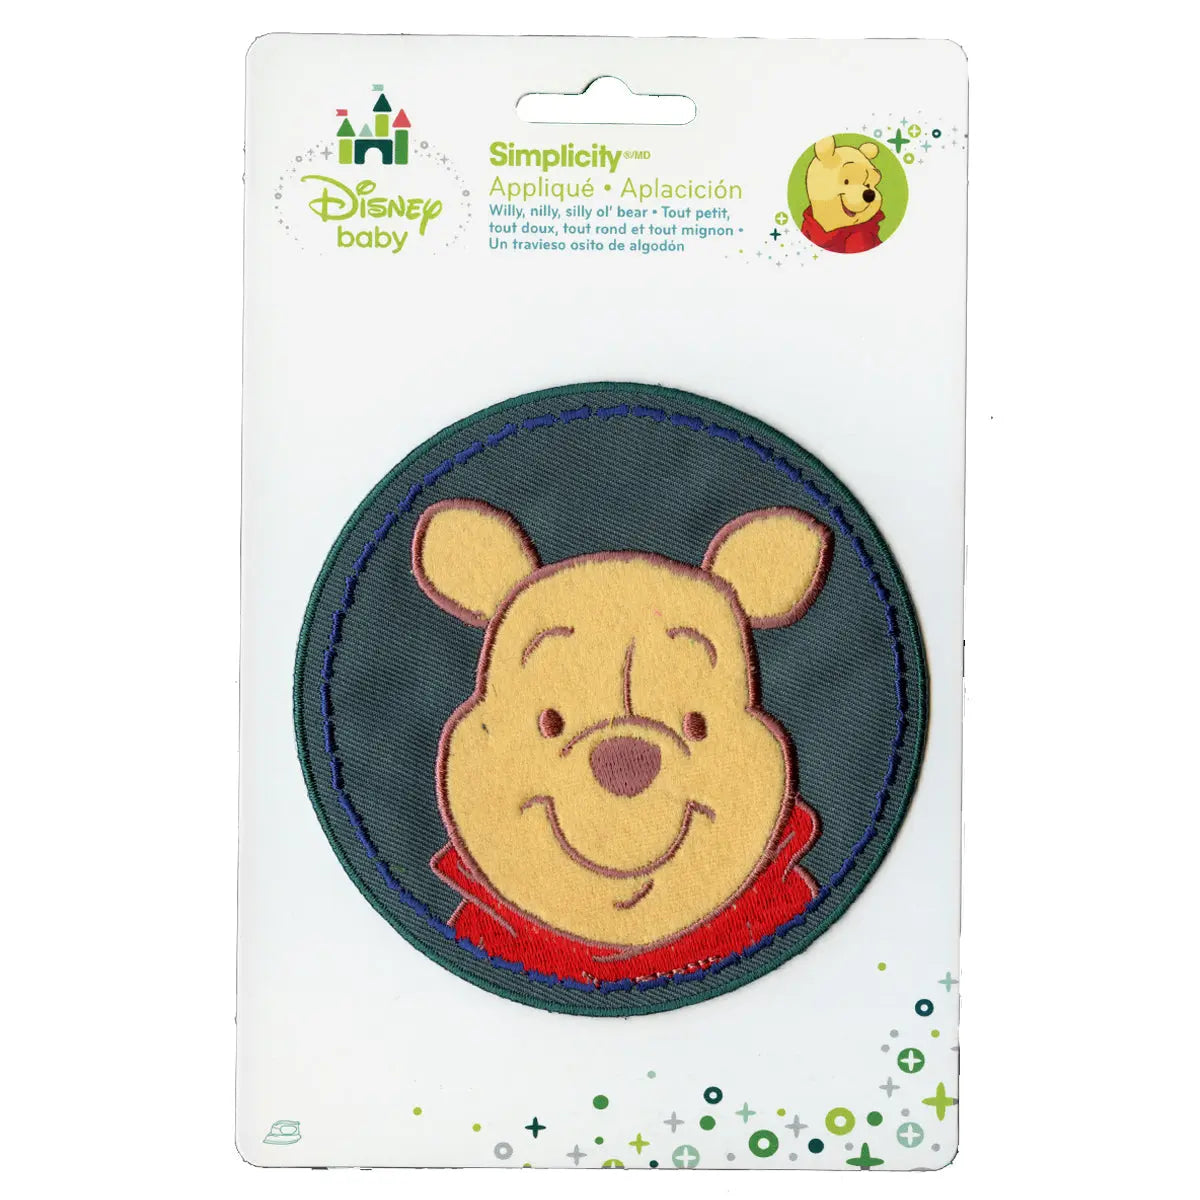 Disney Winnie The Pooh In A Circle Embroidered Applique Iron On Patch 